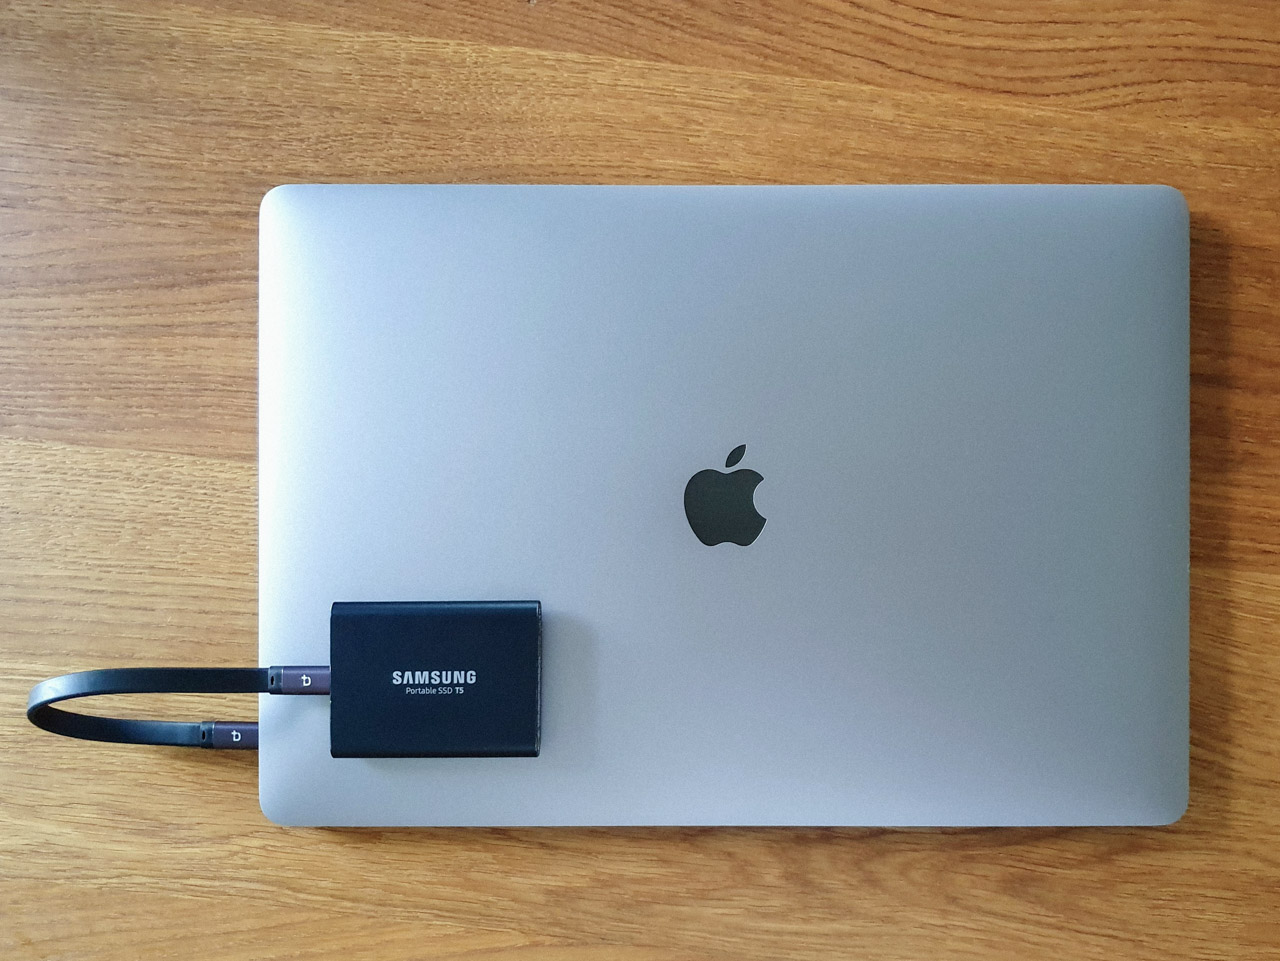 MacBook Pro with External SSD